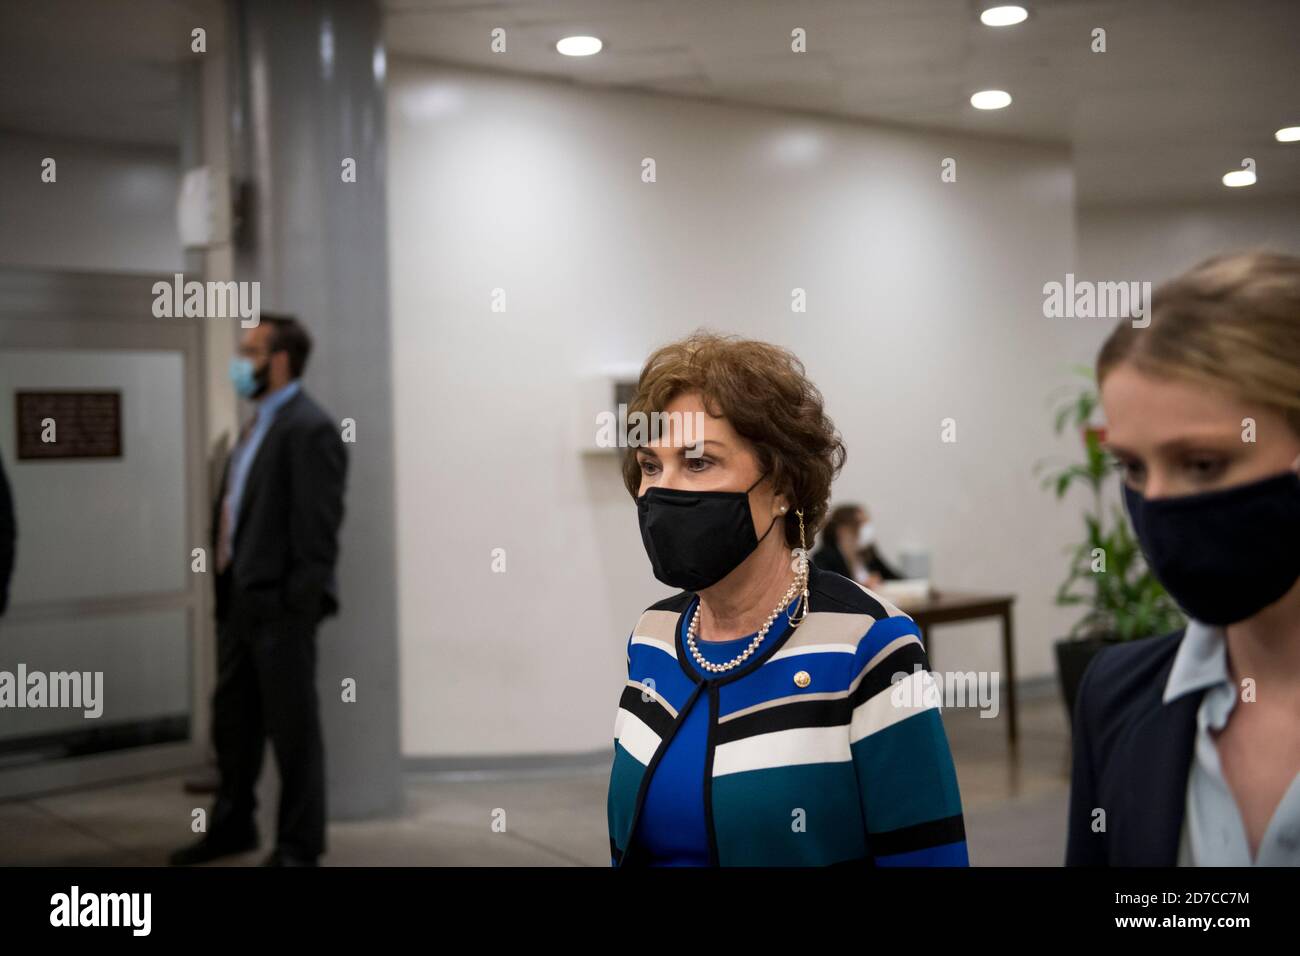 United States Senator Jacky Rosen (Democrat of Nevada) makes hier way to a train in the Senate subway following a vote at the US Capitol in Washington, DC, Wednesday, October 21, 2020. Credit: Rod Lamkey/CNP /MediaPunch Stock Photo